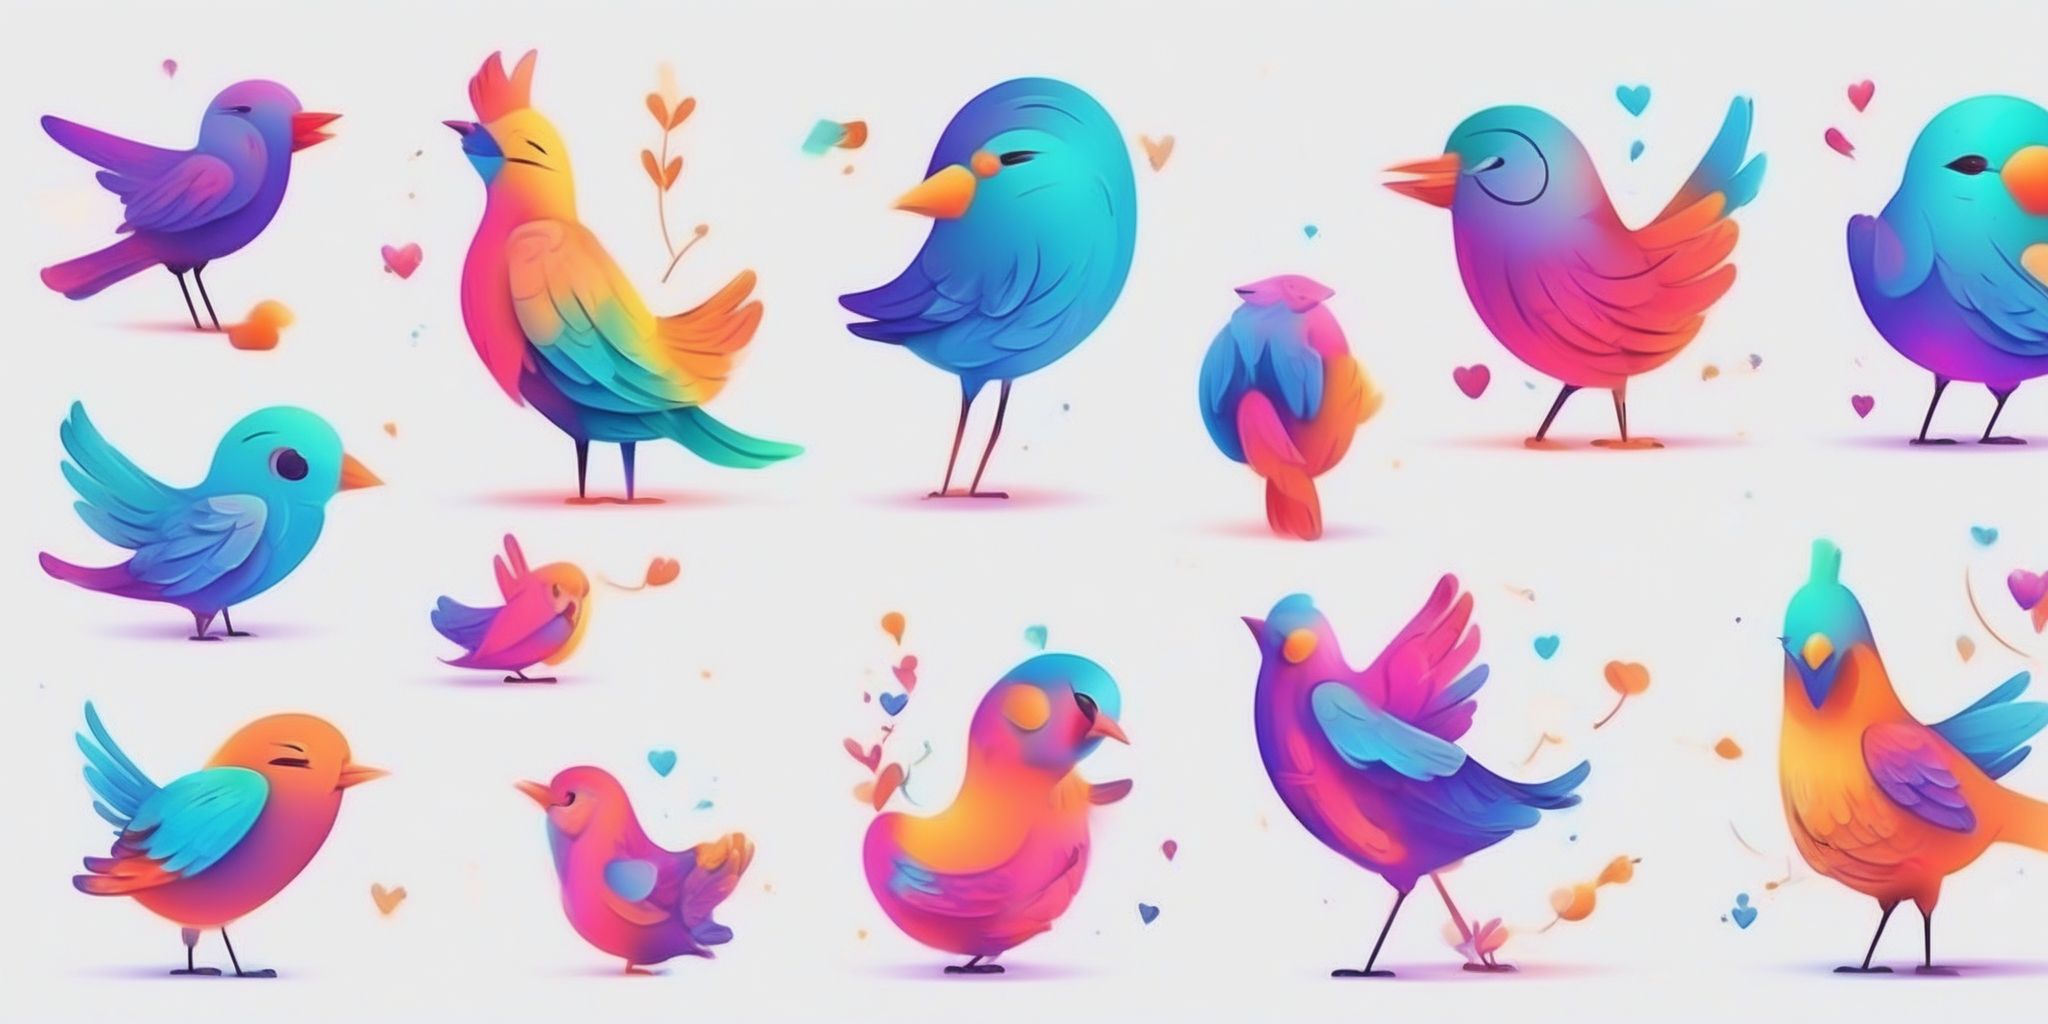 Creative tweets in illustration style with gradients and white background